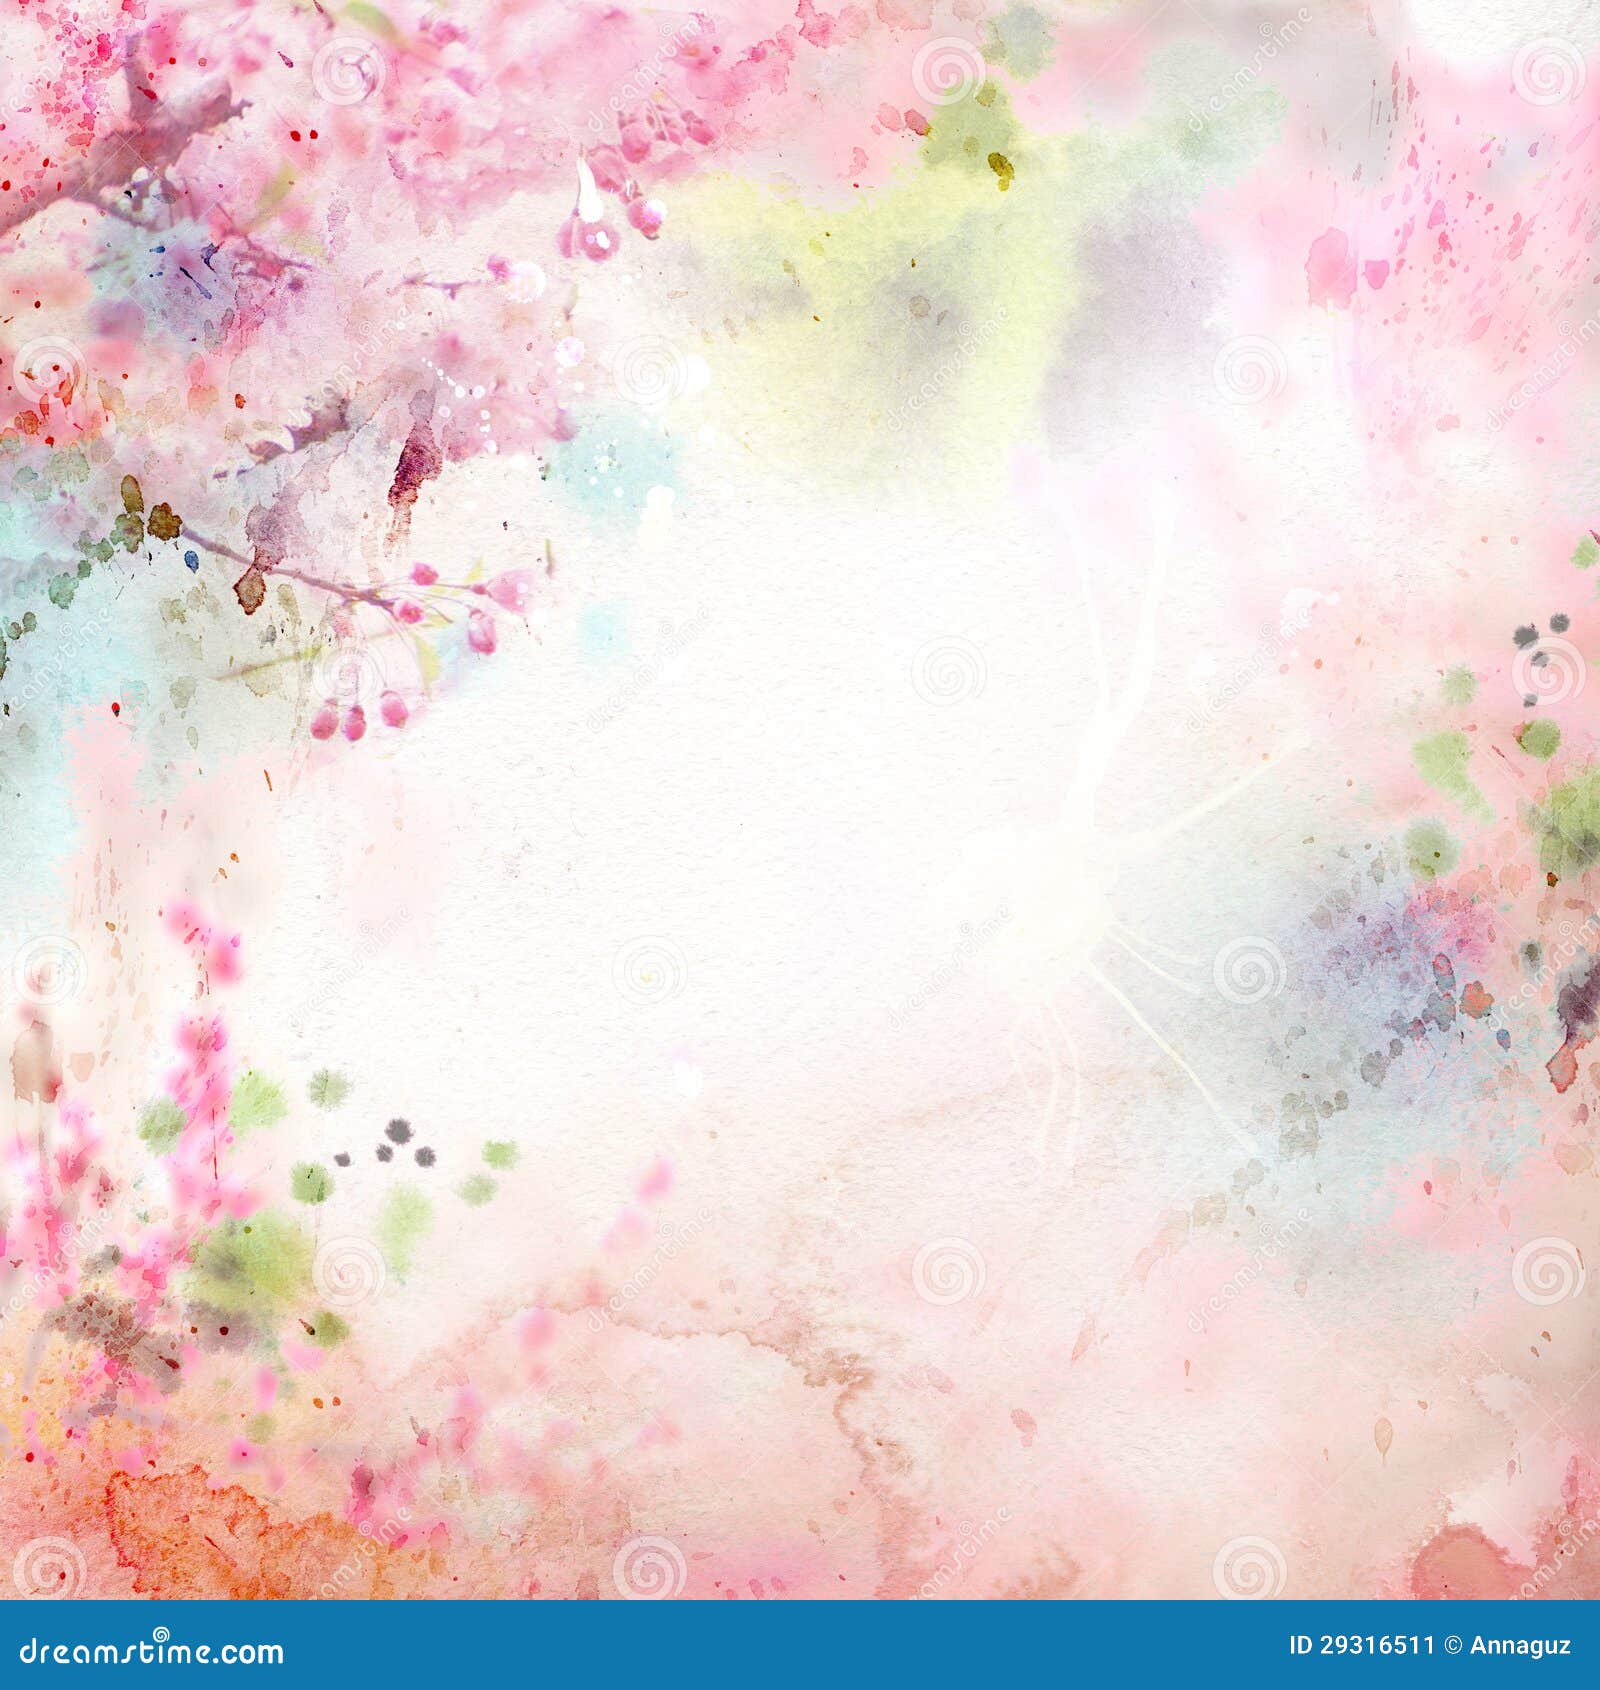 floral background with watercolor sakura